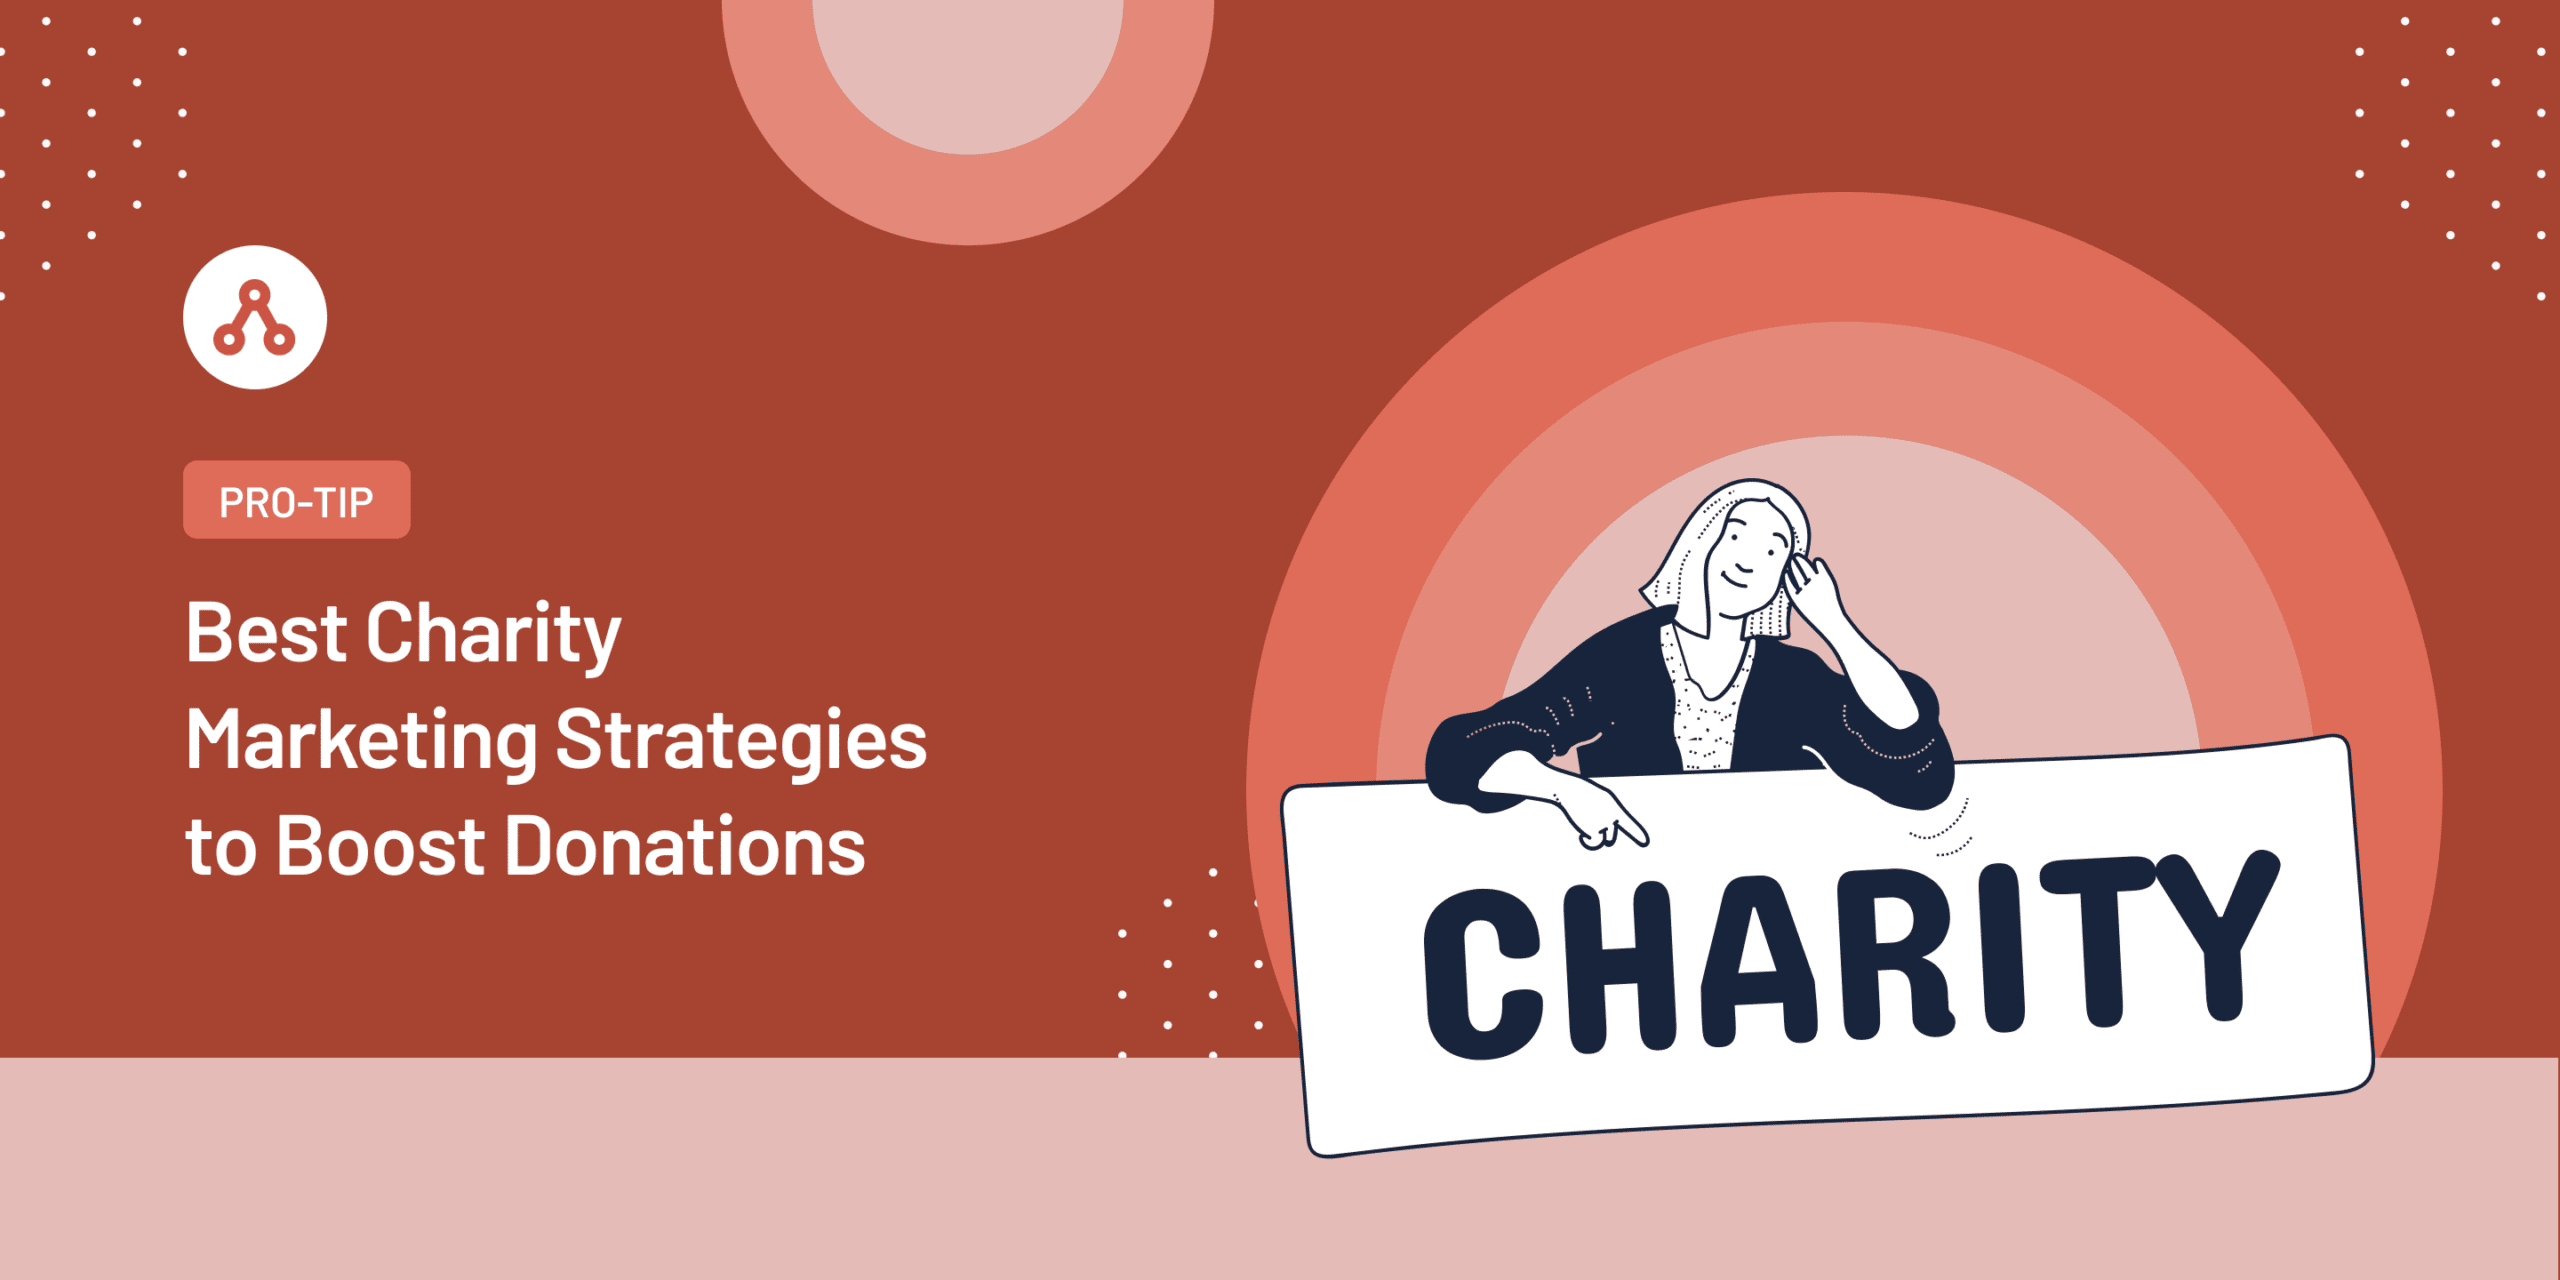 9 Best Charity Marketing Strategies to Boost Donations